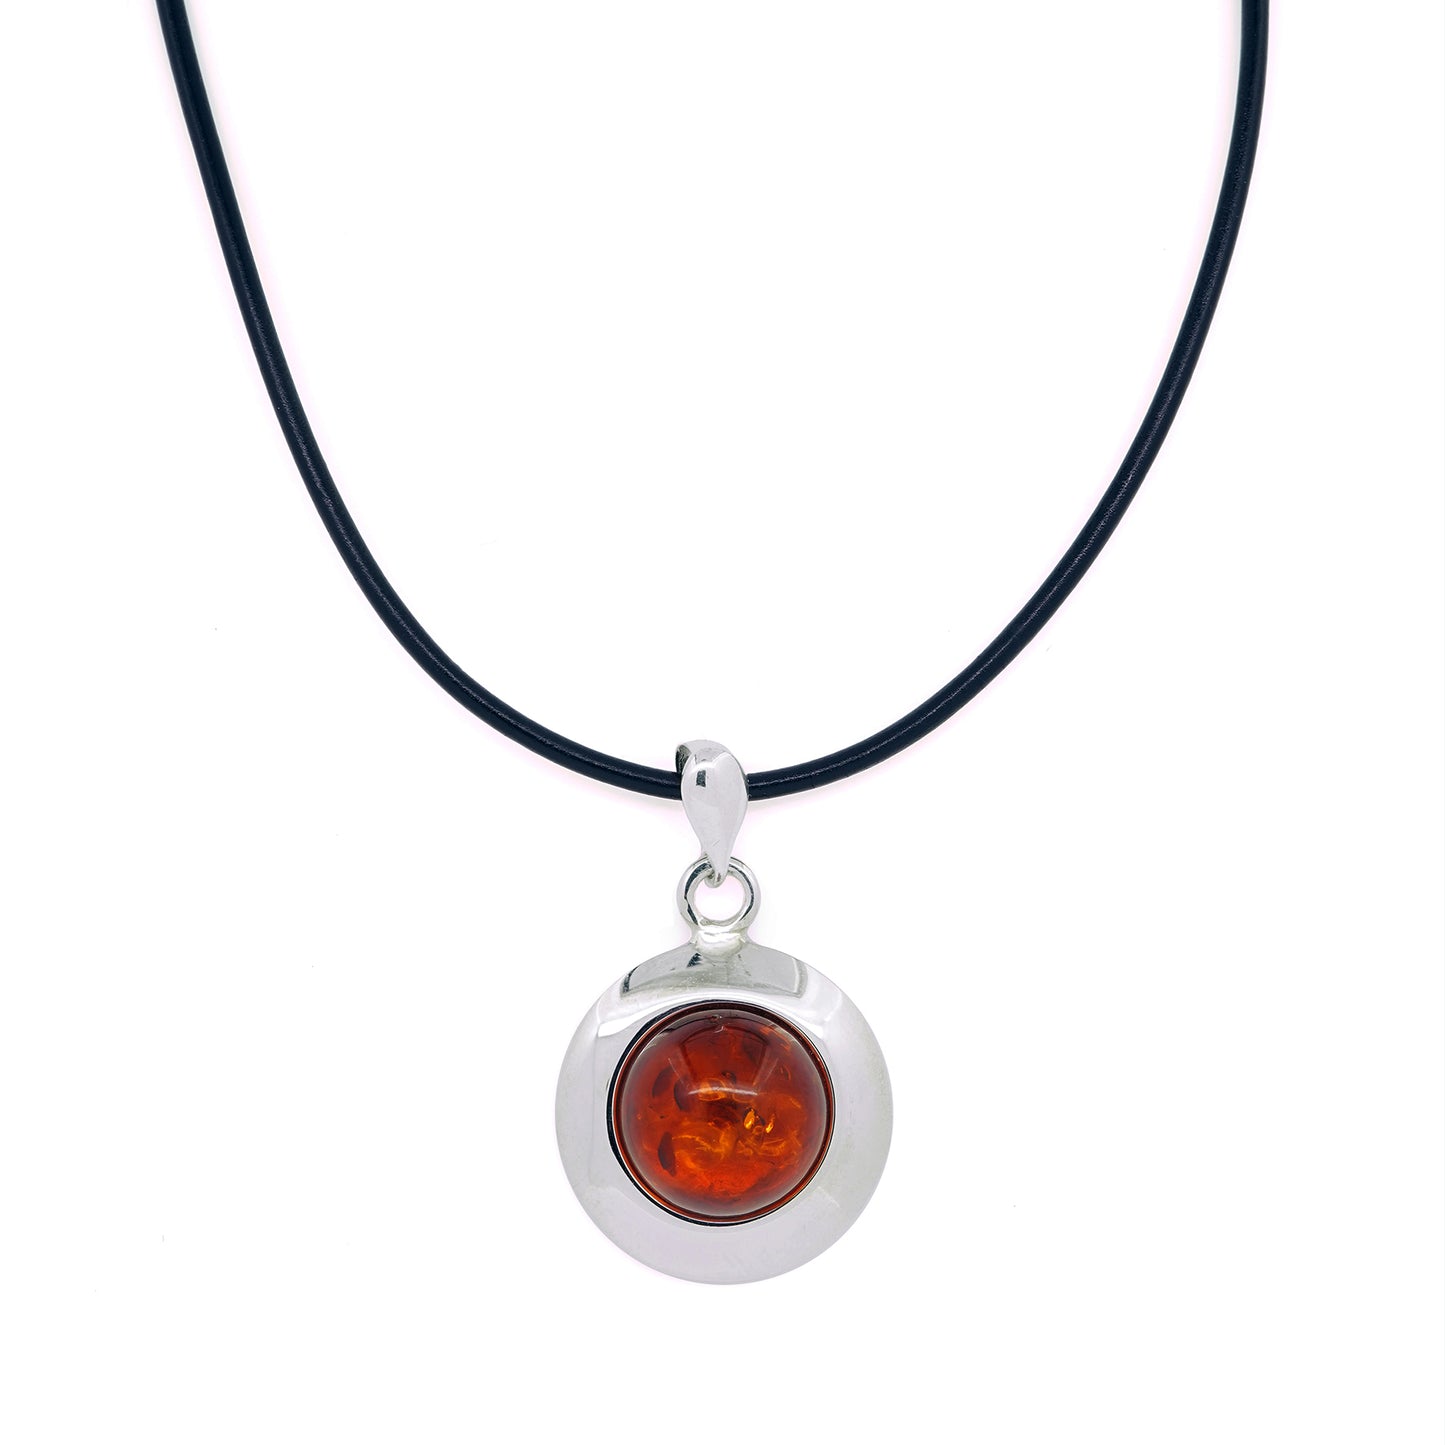 Handmade Baltic Amber Pendant in Sterling Silver